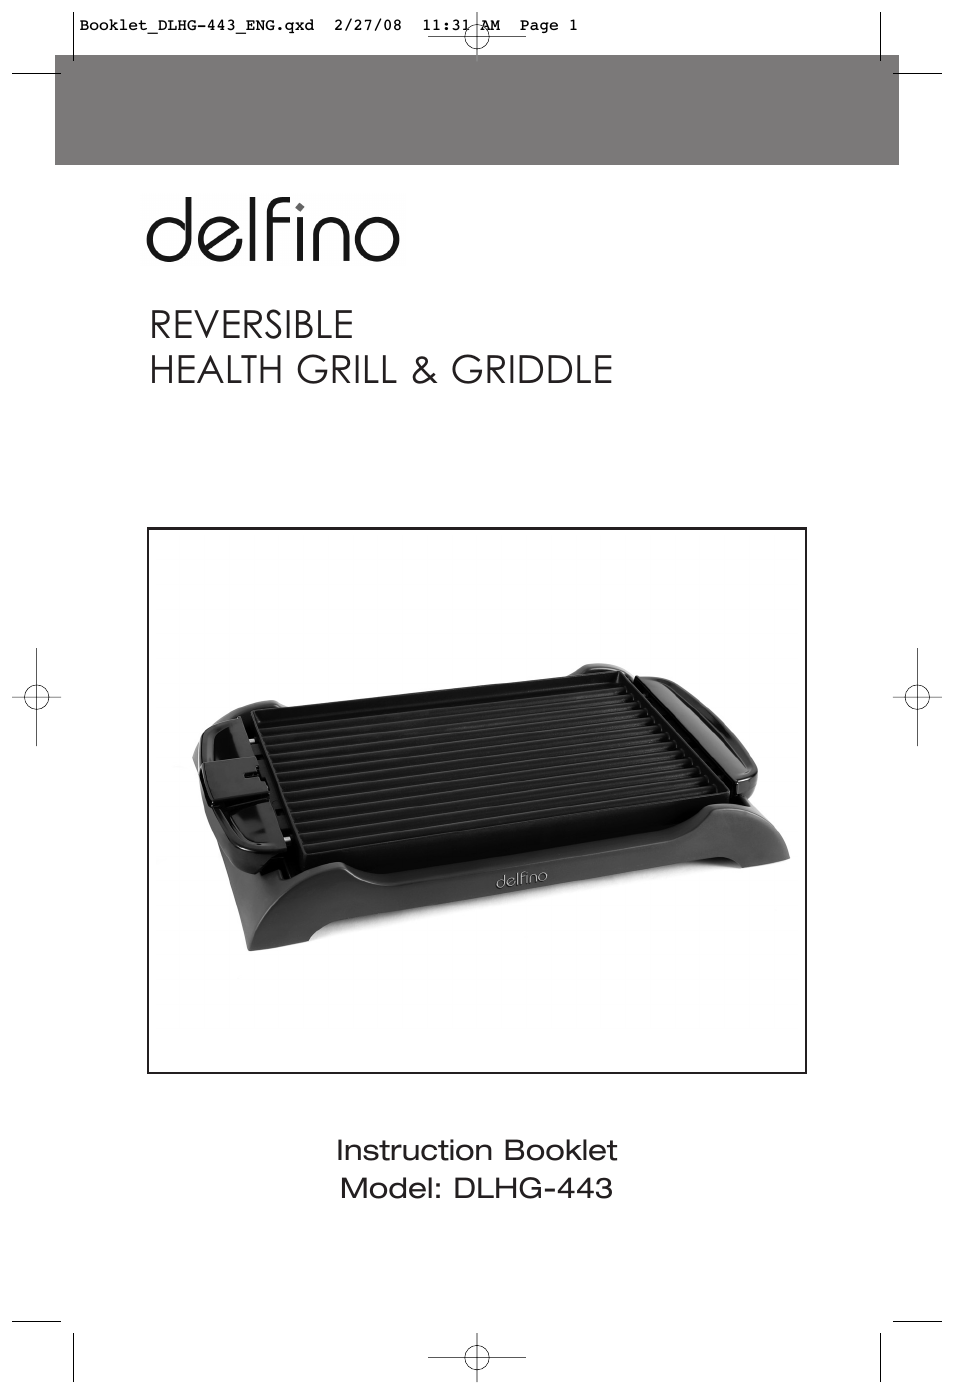 Delfino Reversible Health Grill and Griddle DLHG-443